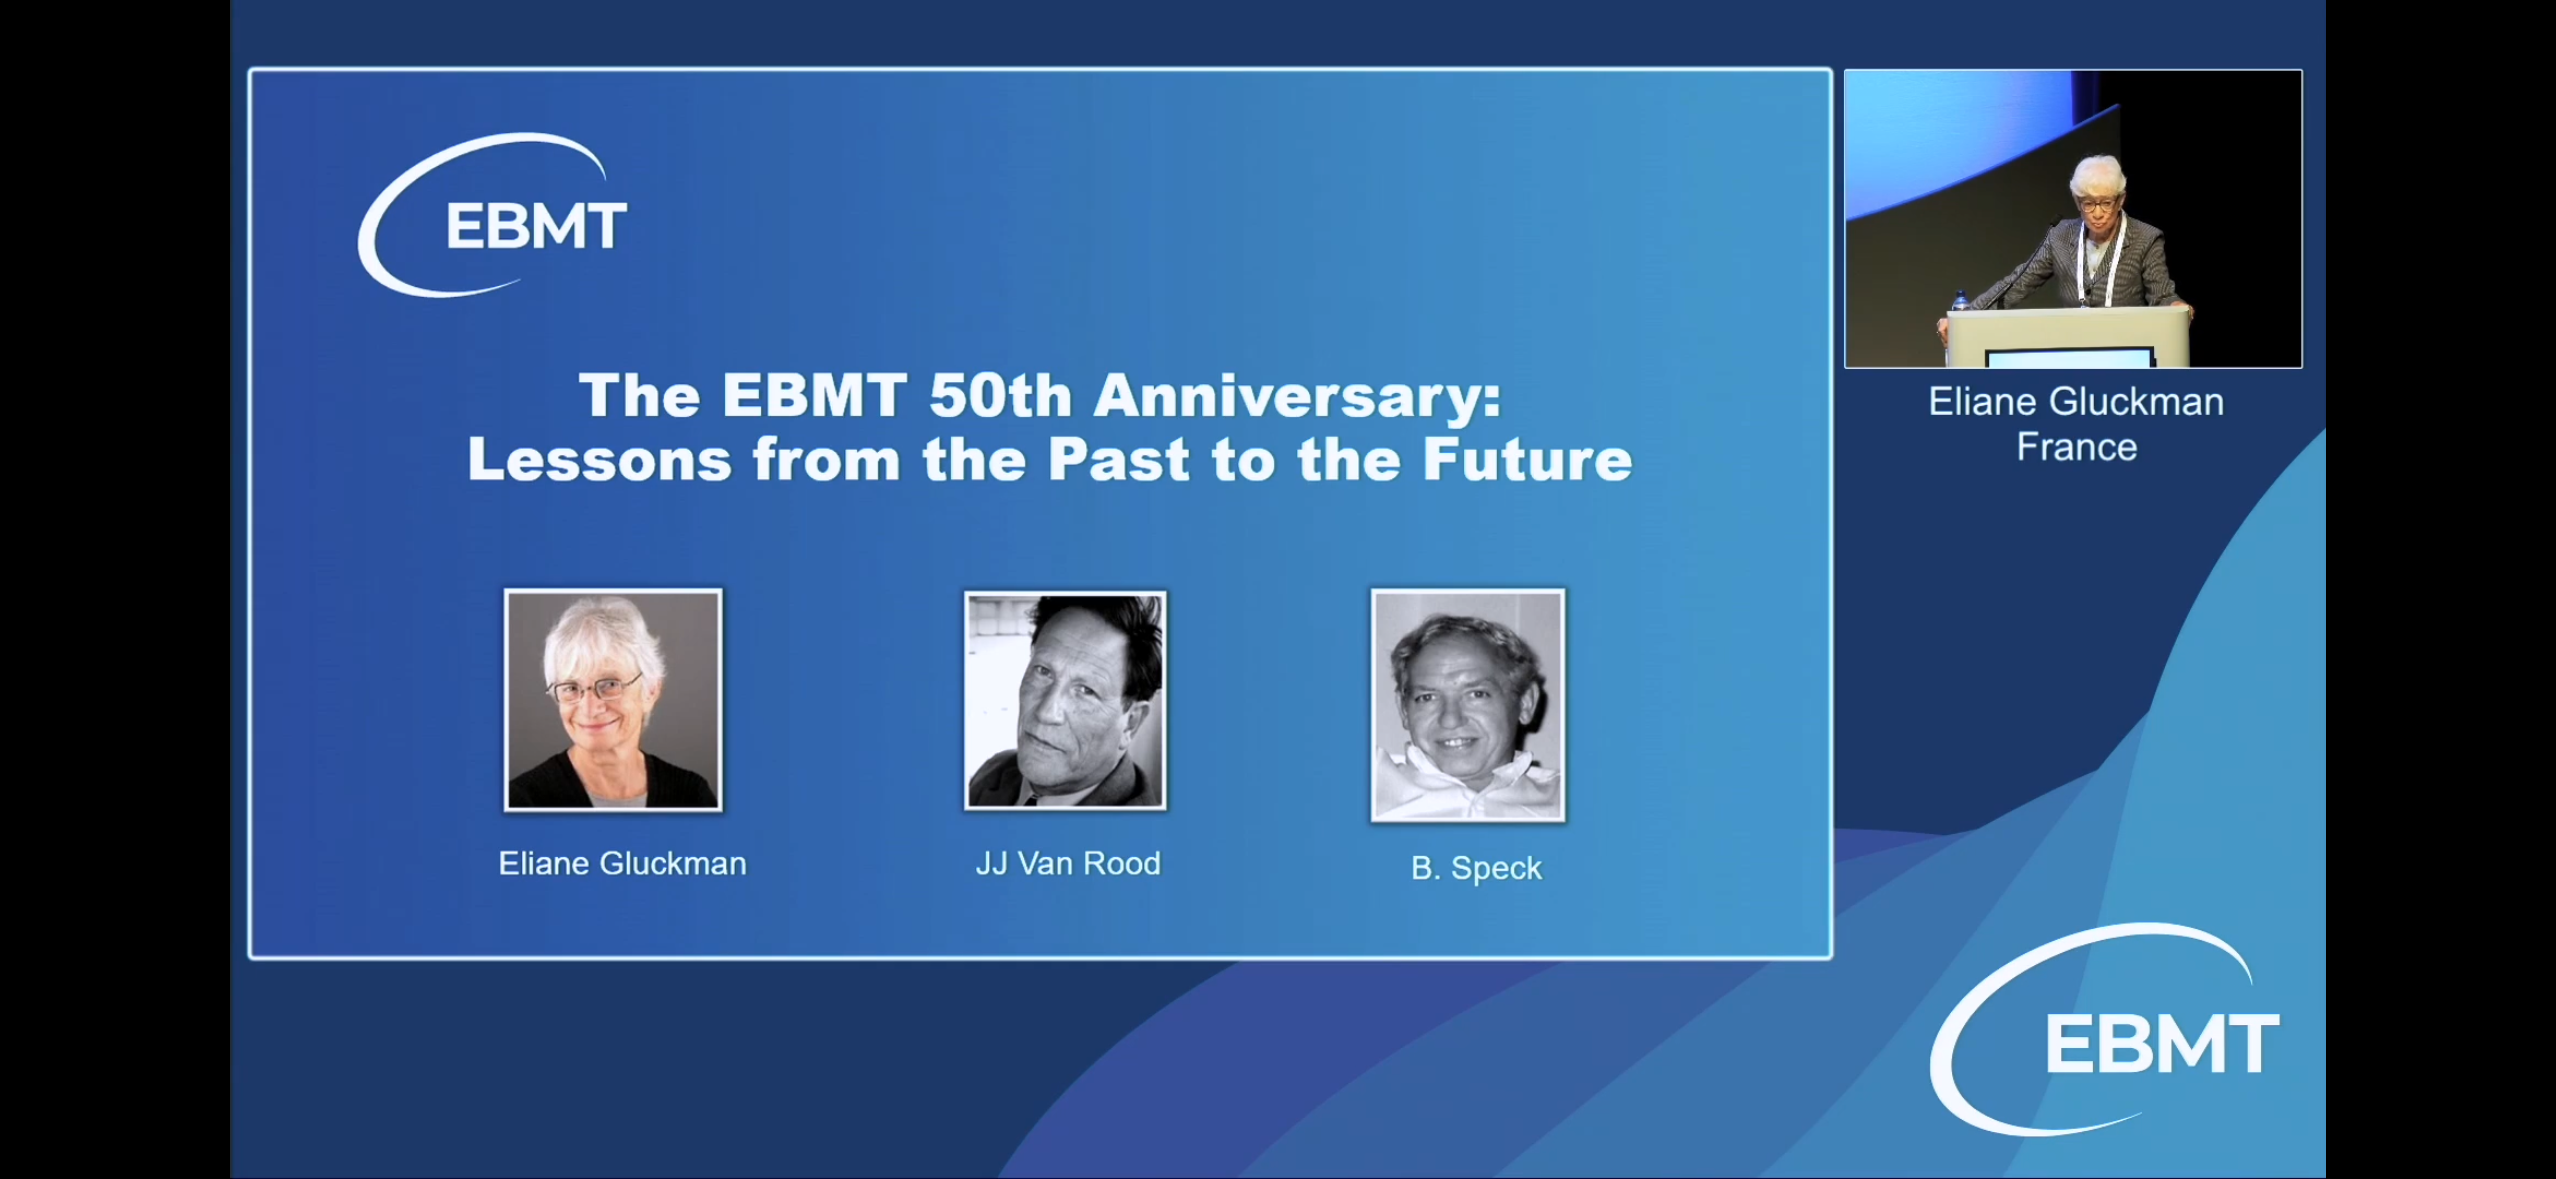 EBMT celebrates the 50th anniversary of its creation